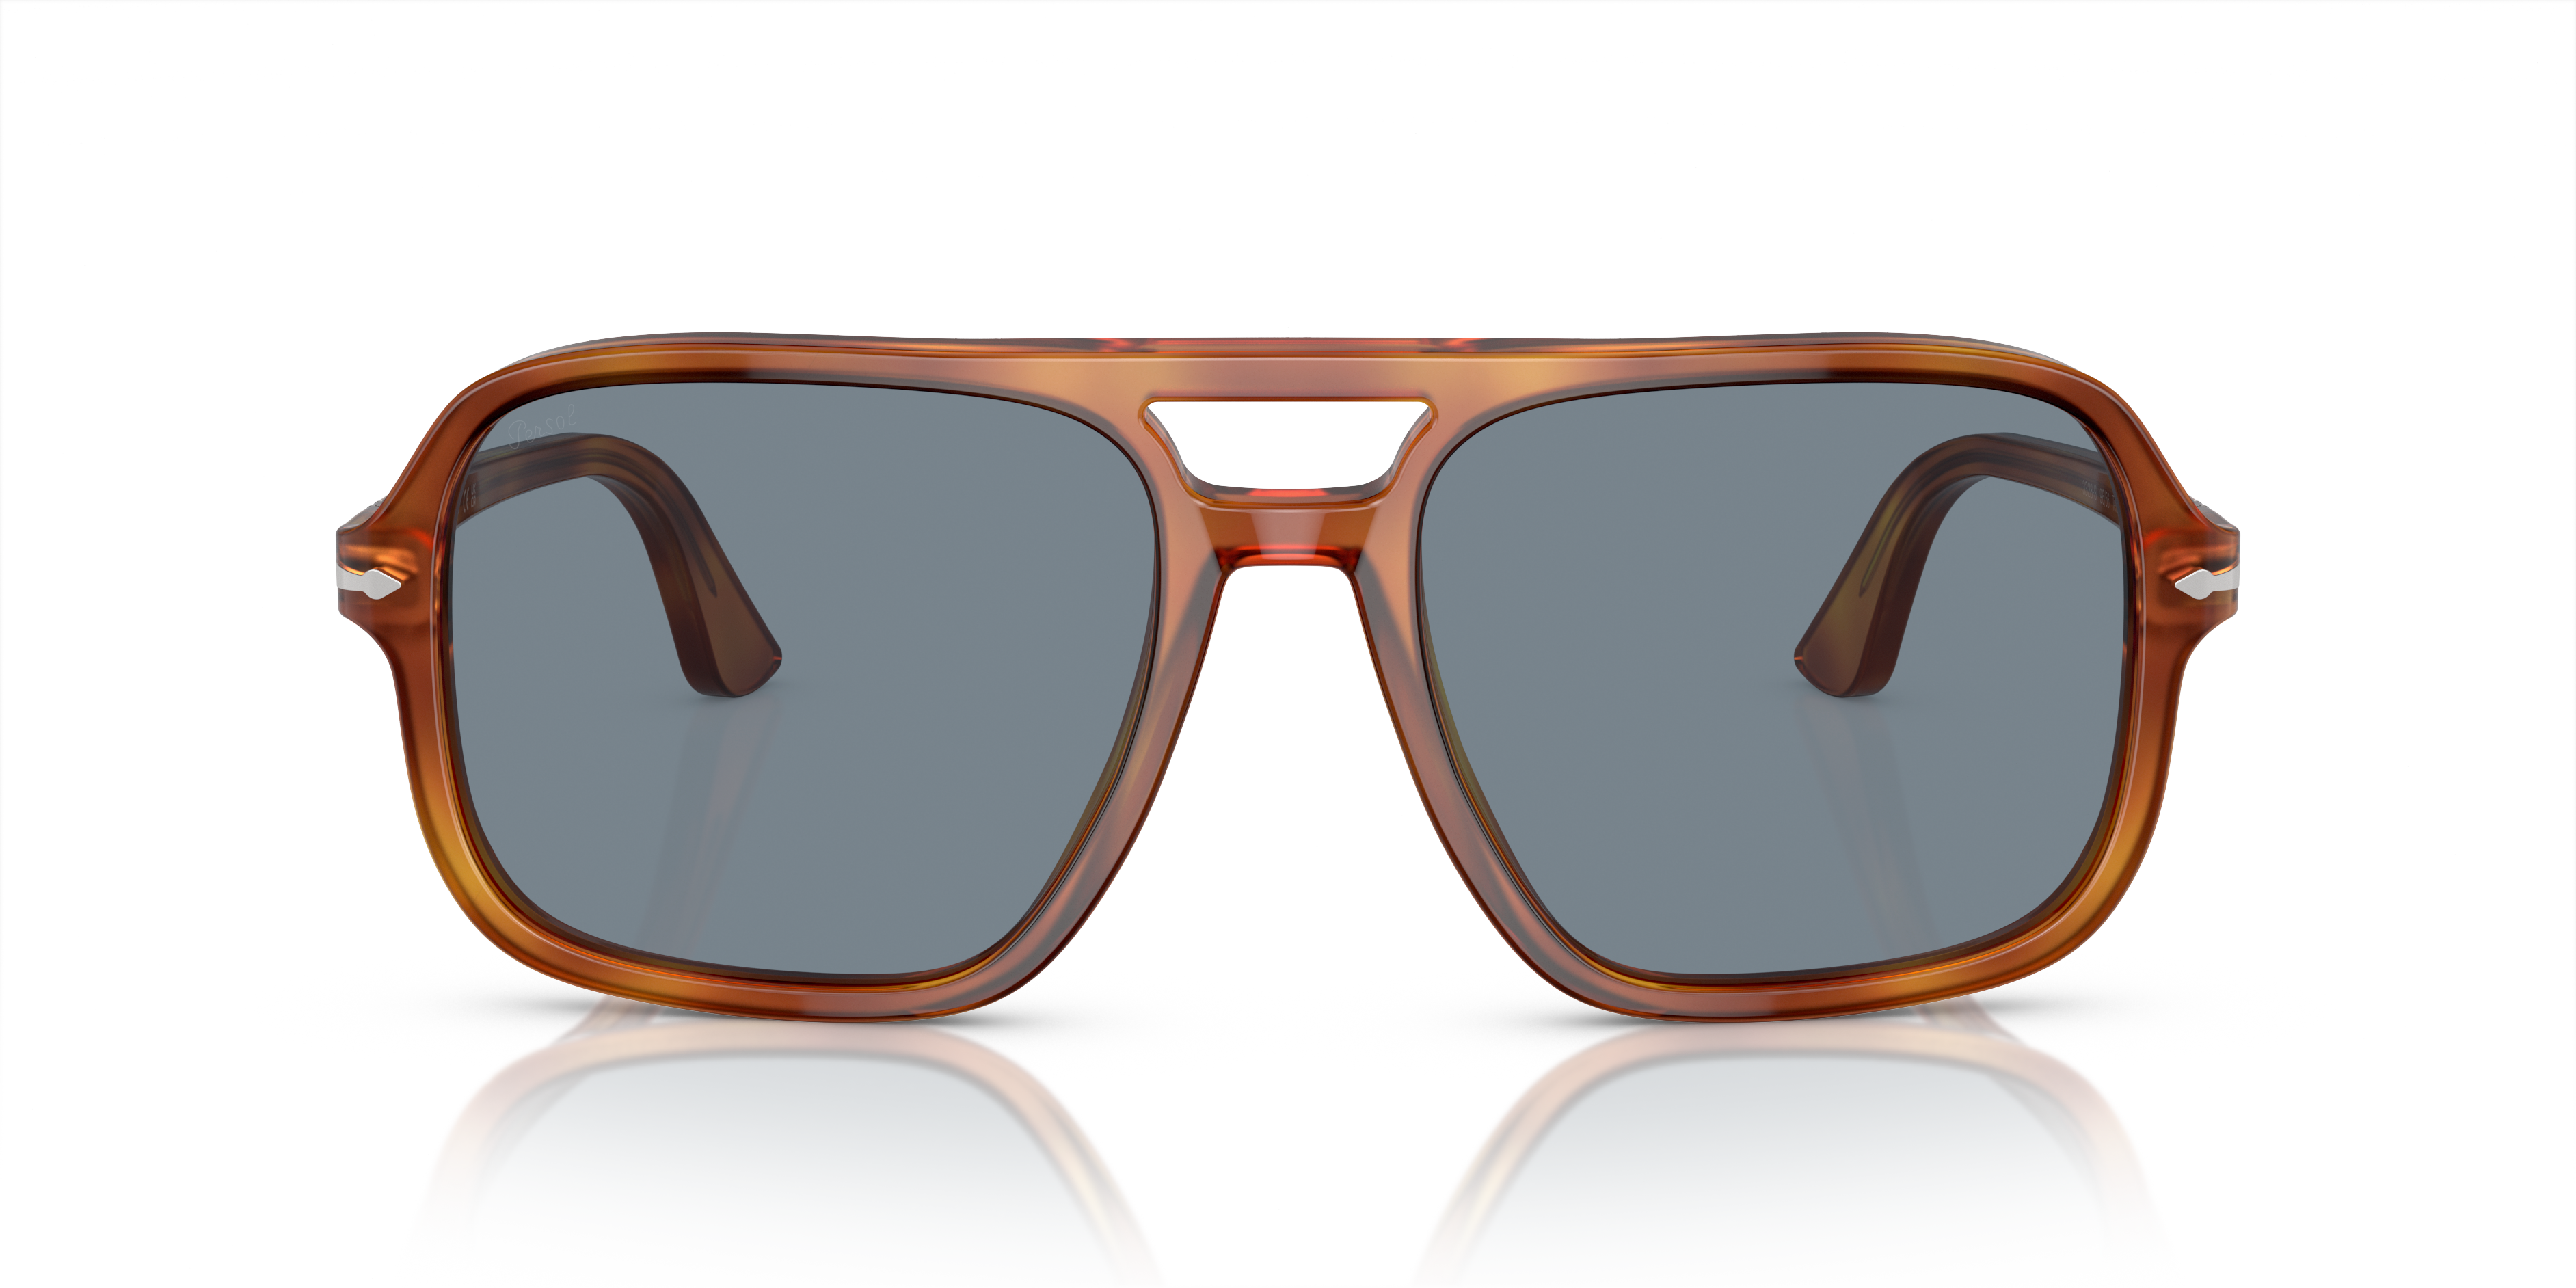 [products.image.front] Persol 0PO3328S 96/56